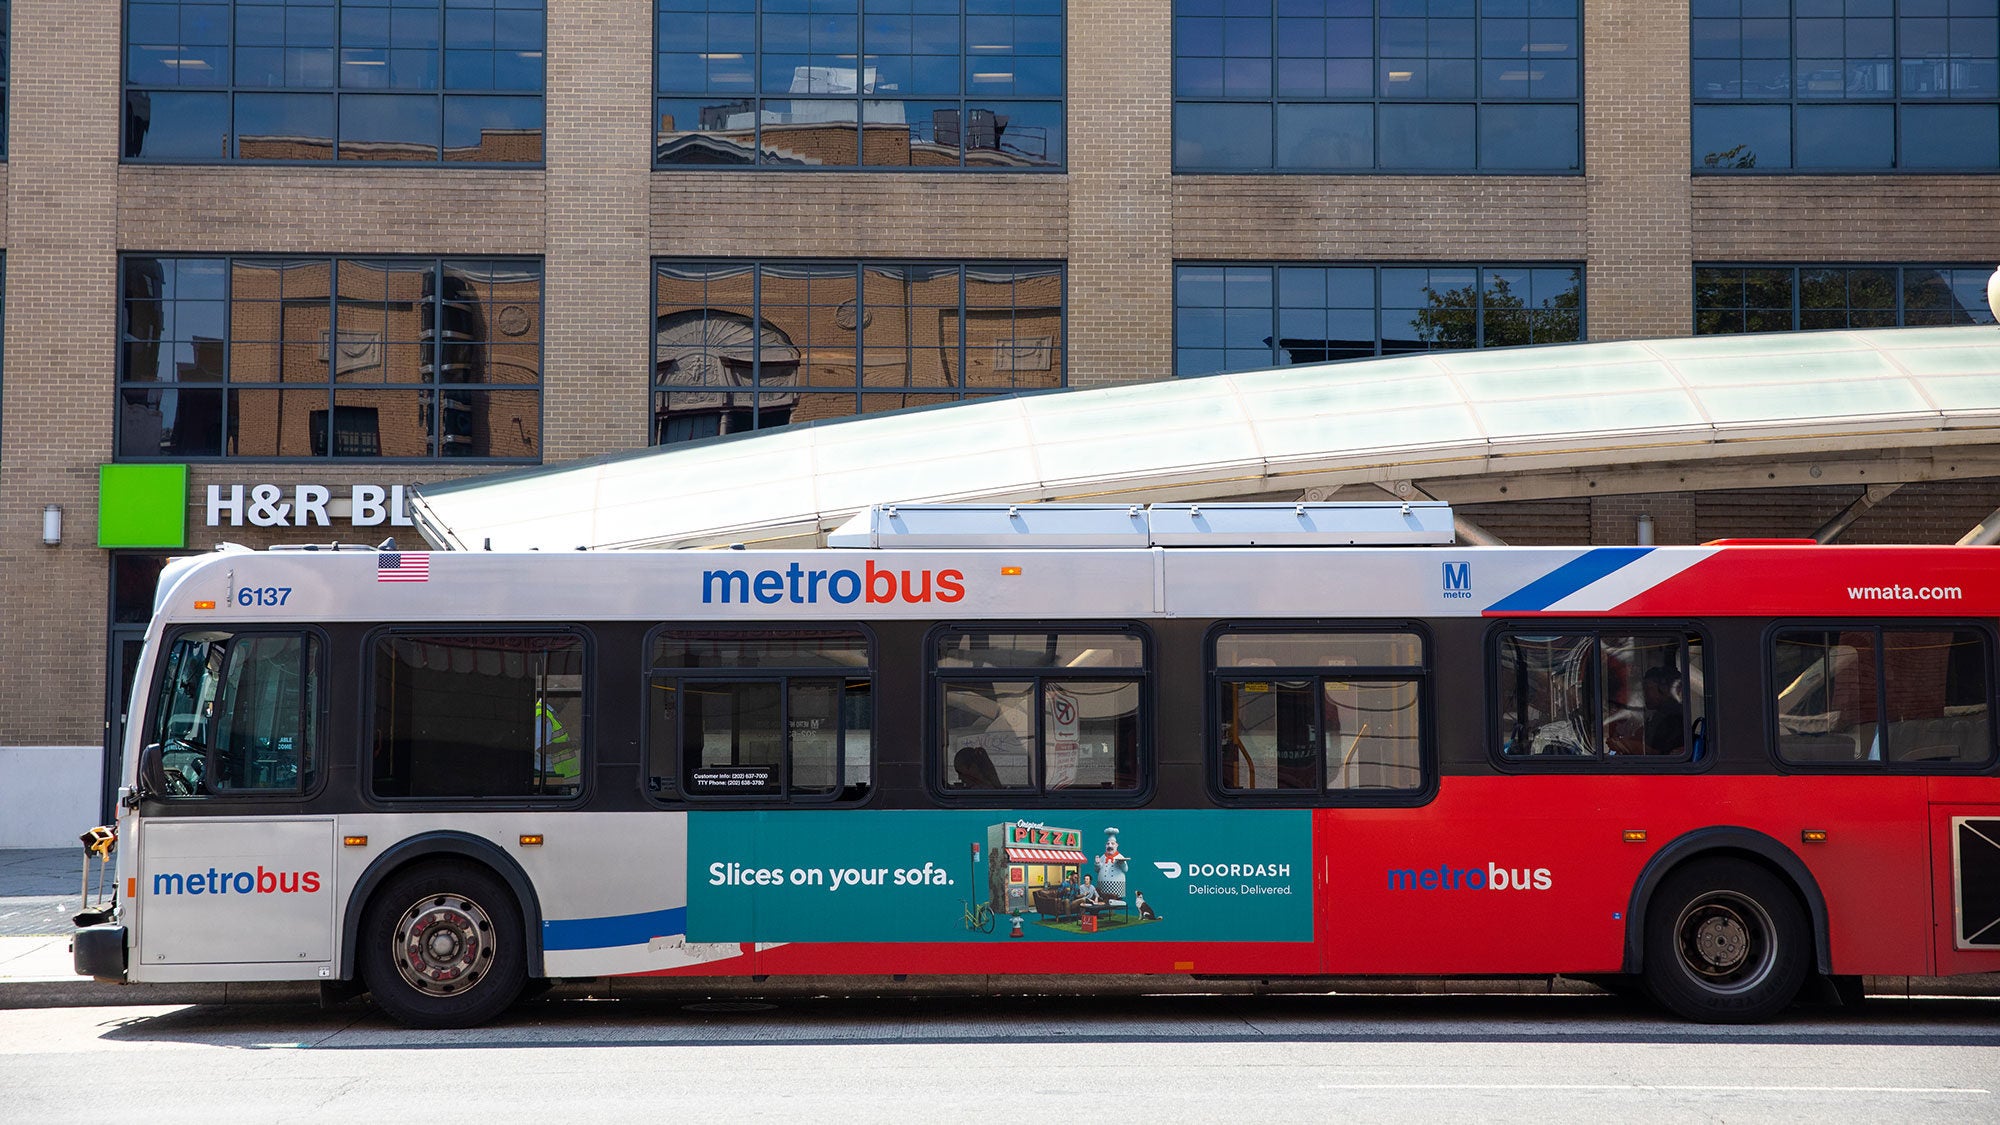 A DC Metrobus makes a stop in the city.